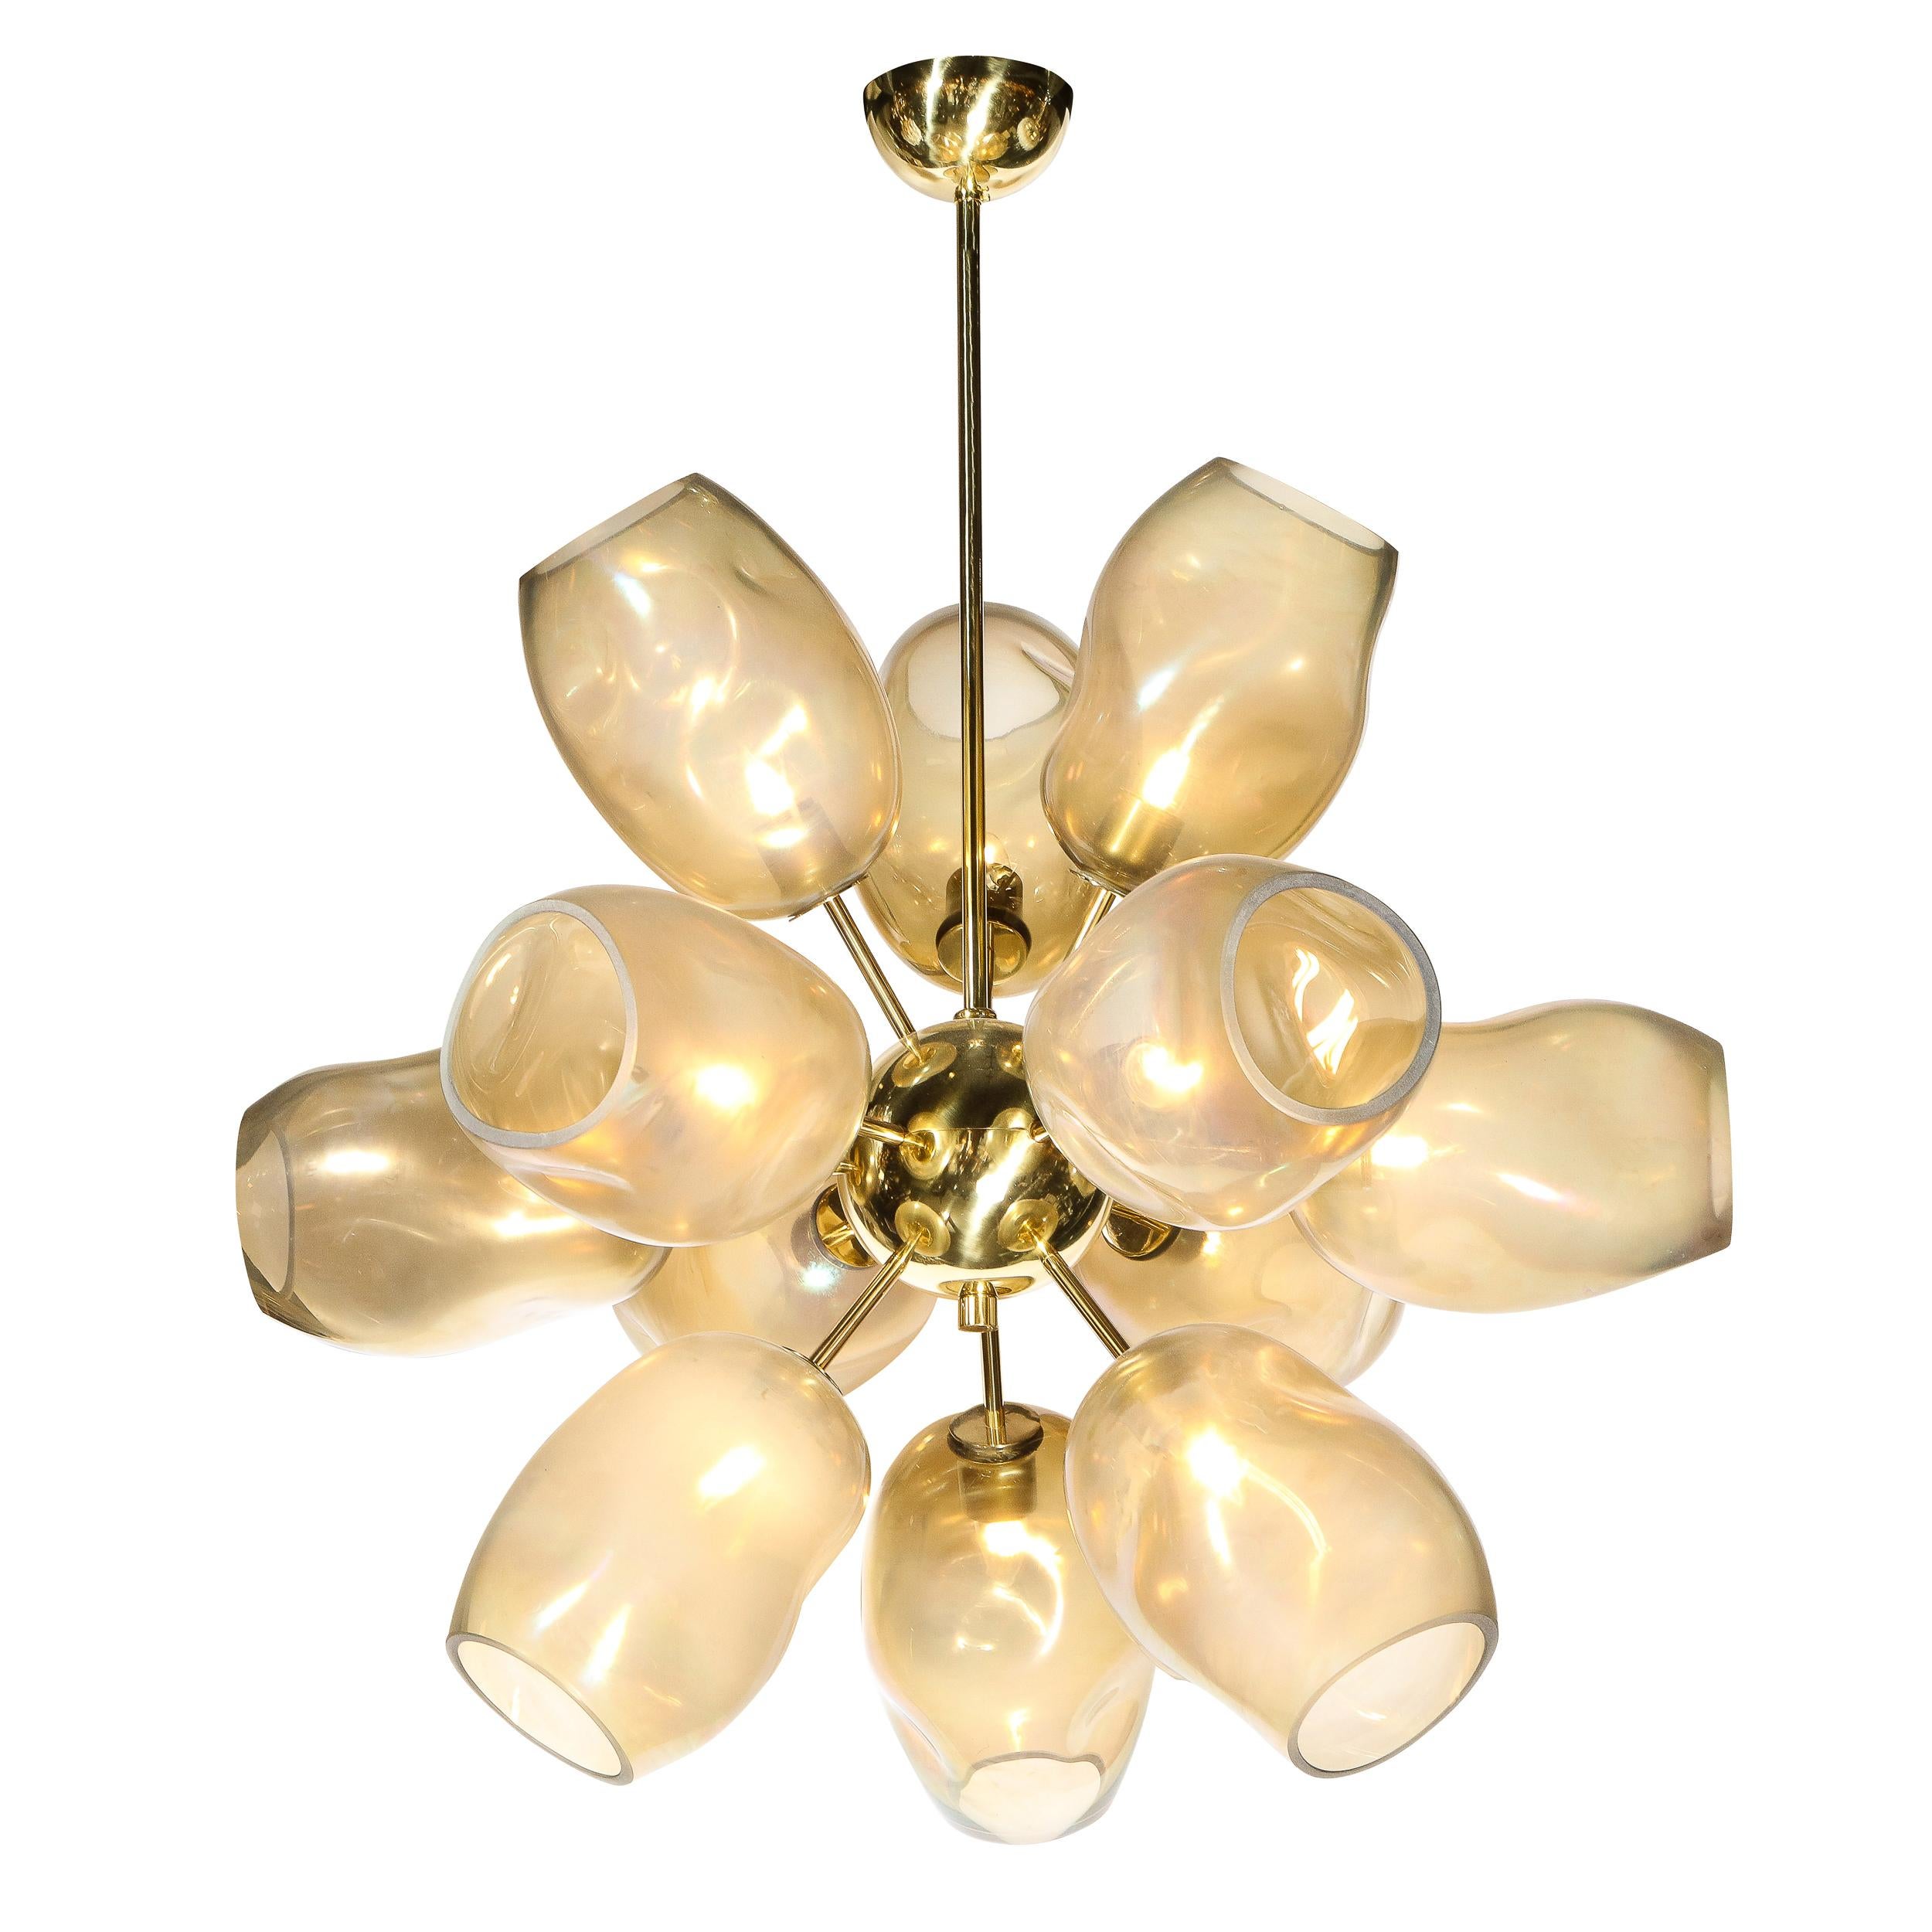 Exclusive to High Style Deco, this stunning modernist chandelier was handblown in Murano, Italy- the island off the coast of Venice renowned for centuries for its superlative glass production. This beautiful fixture offers twelve lustrous polished